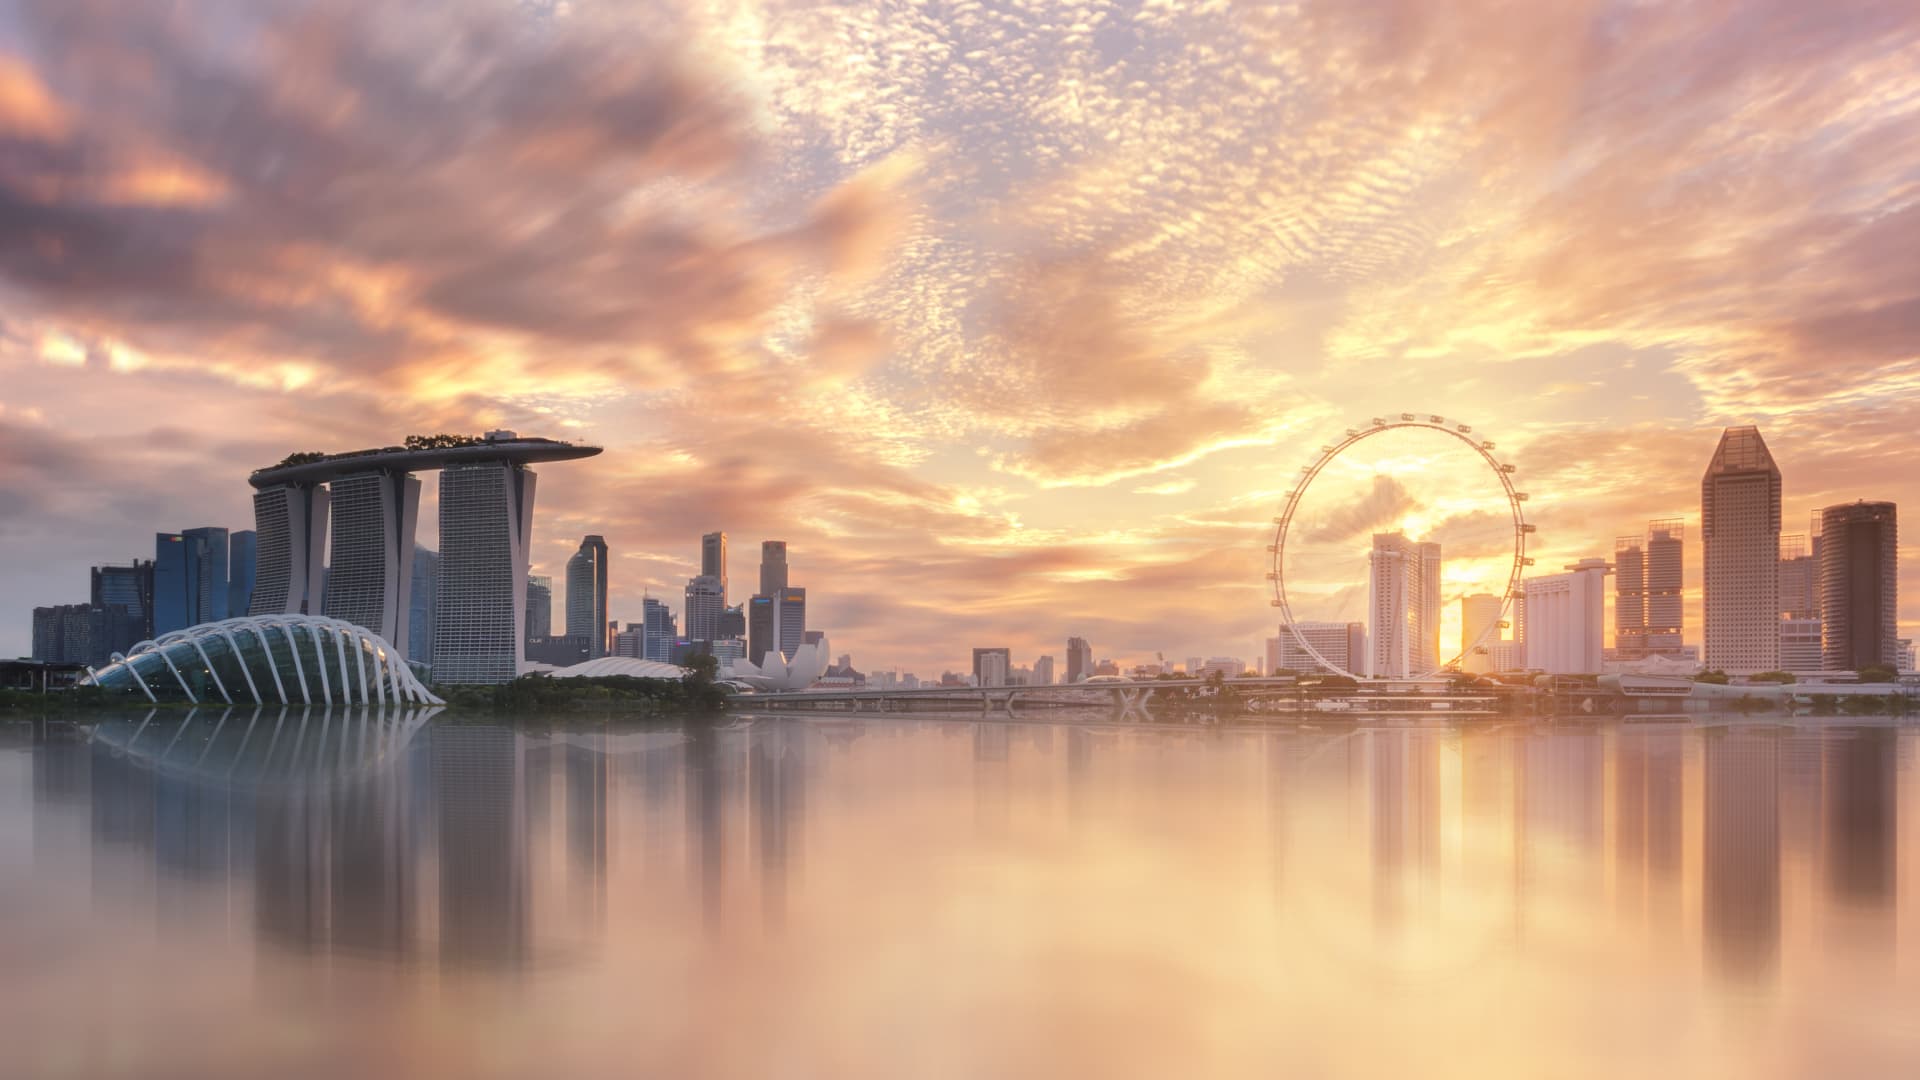 Singapore's passport is now the most powerful in the world. Here's how other countries ranked